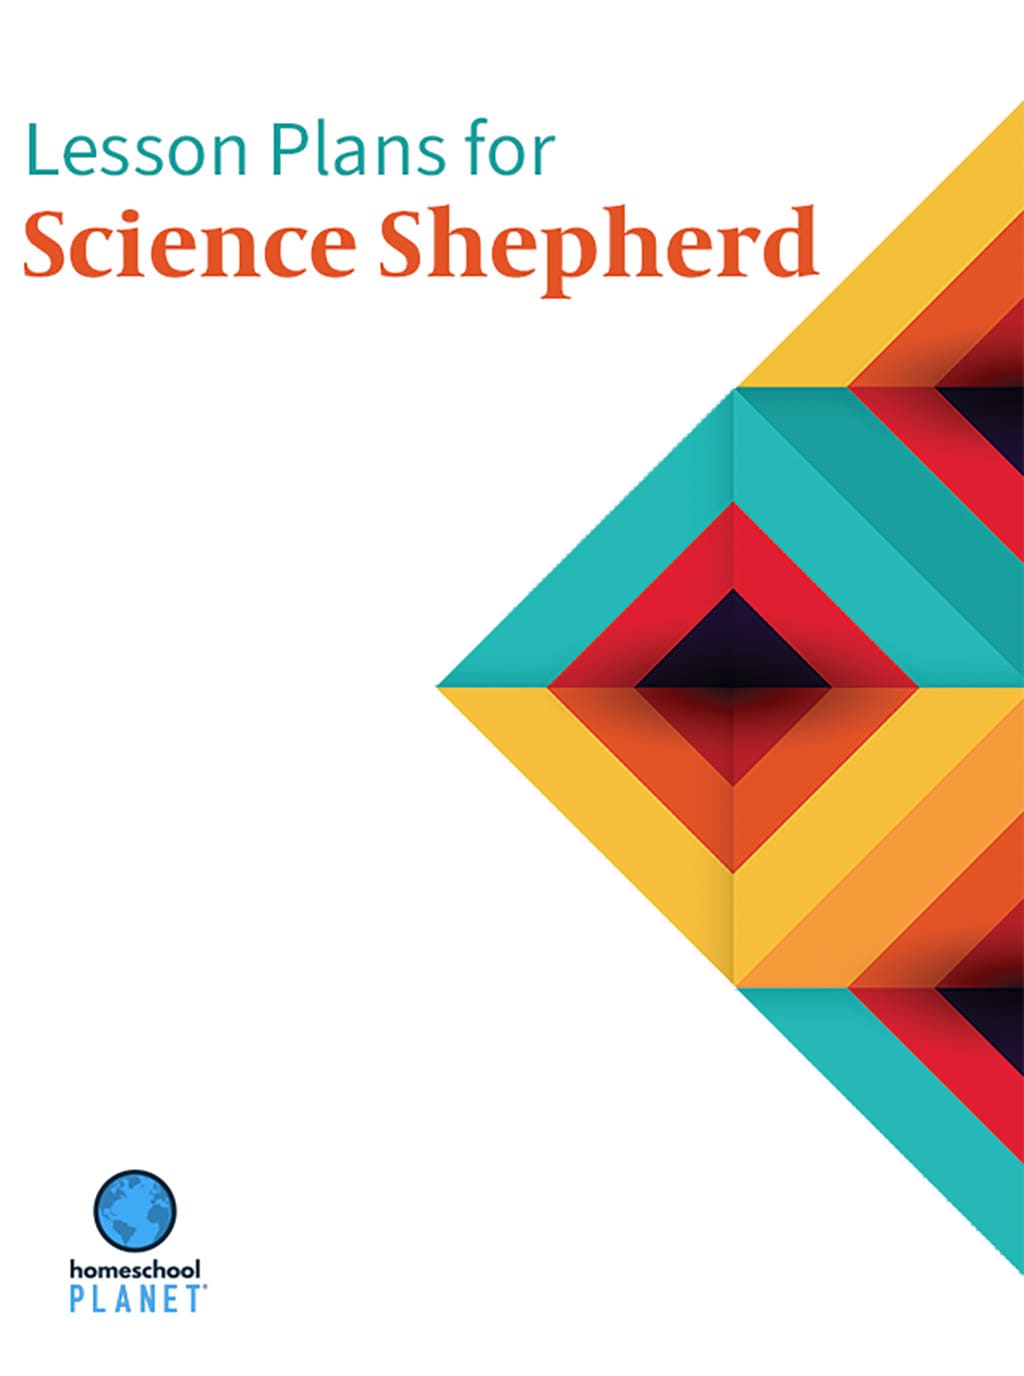 Cover image for the Science Shepherd homeschool physics lesson plan from Homeschool Planet